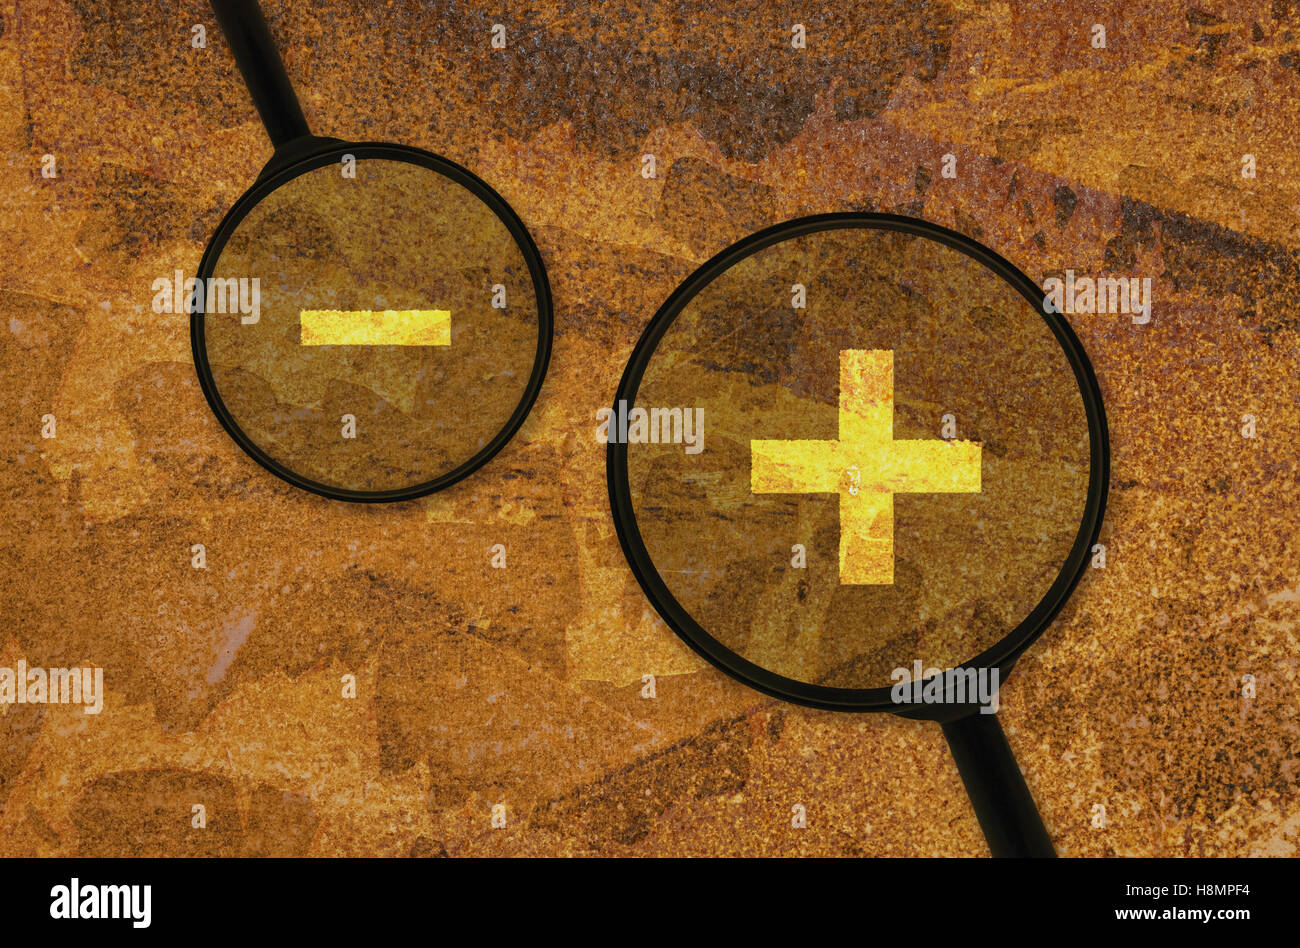 Mathematical signs for addition and subtraction under a magnifier Stock Photo